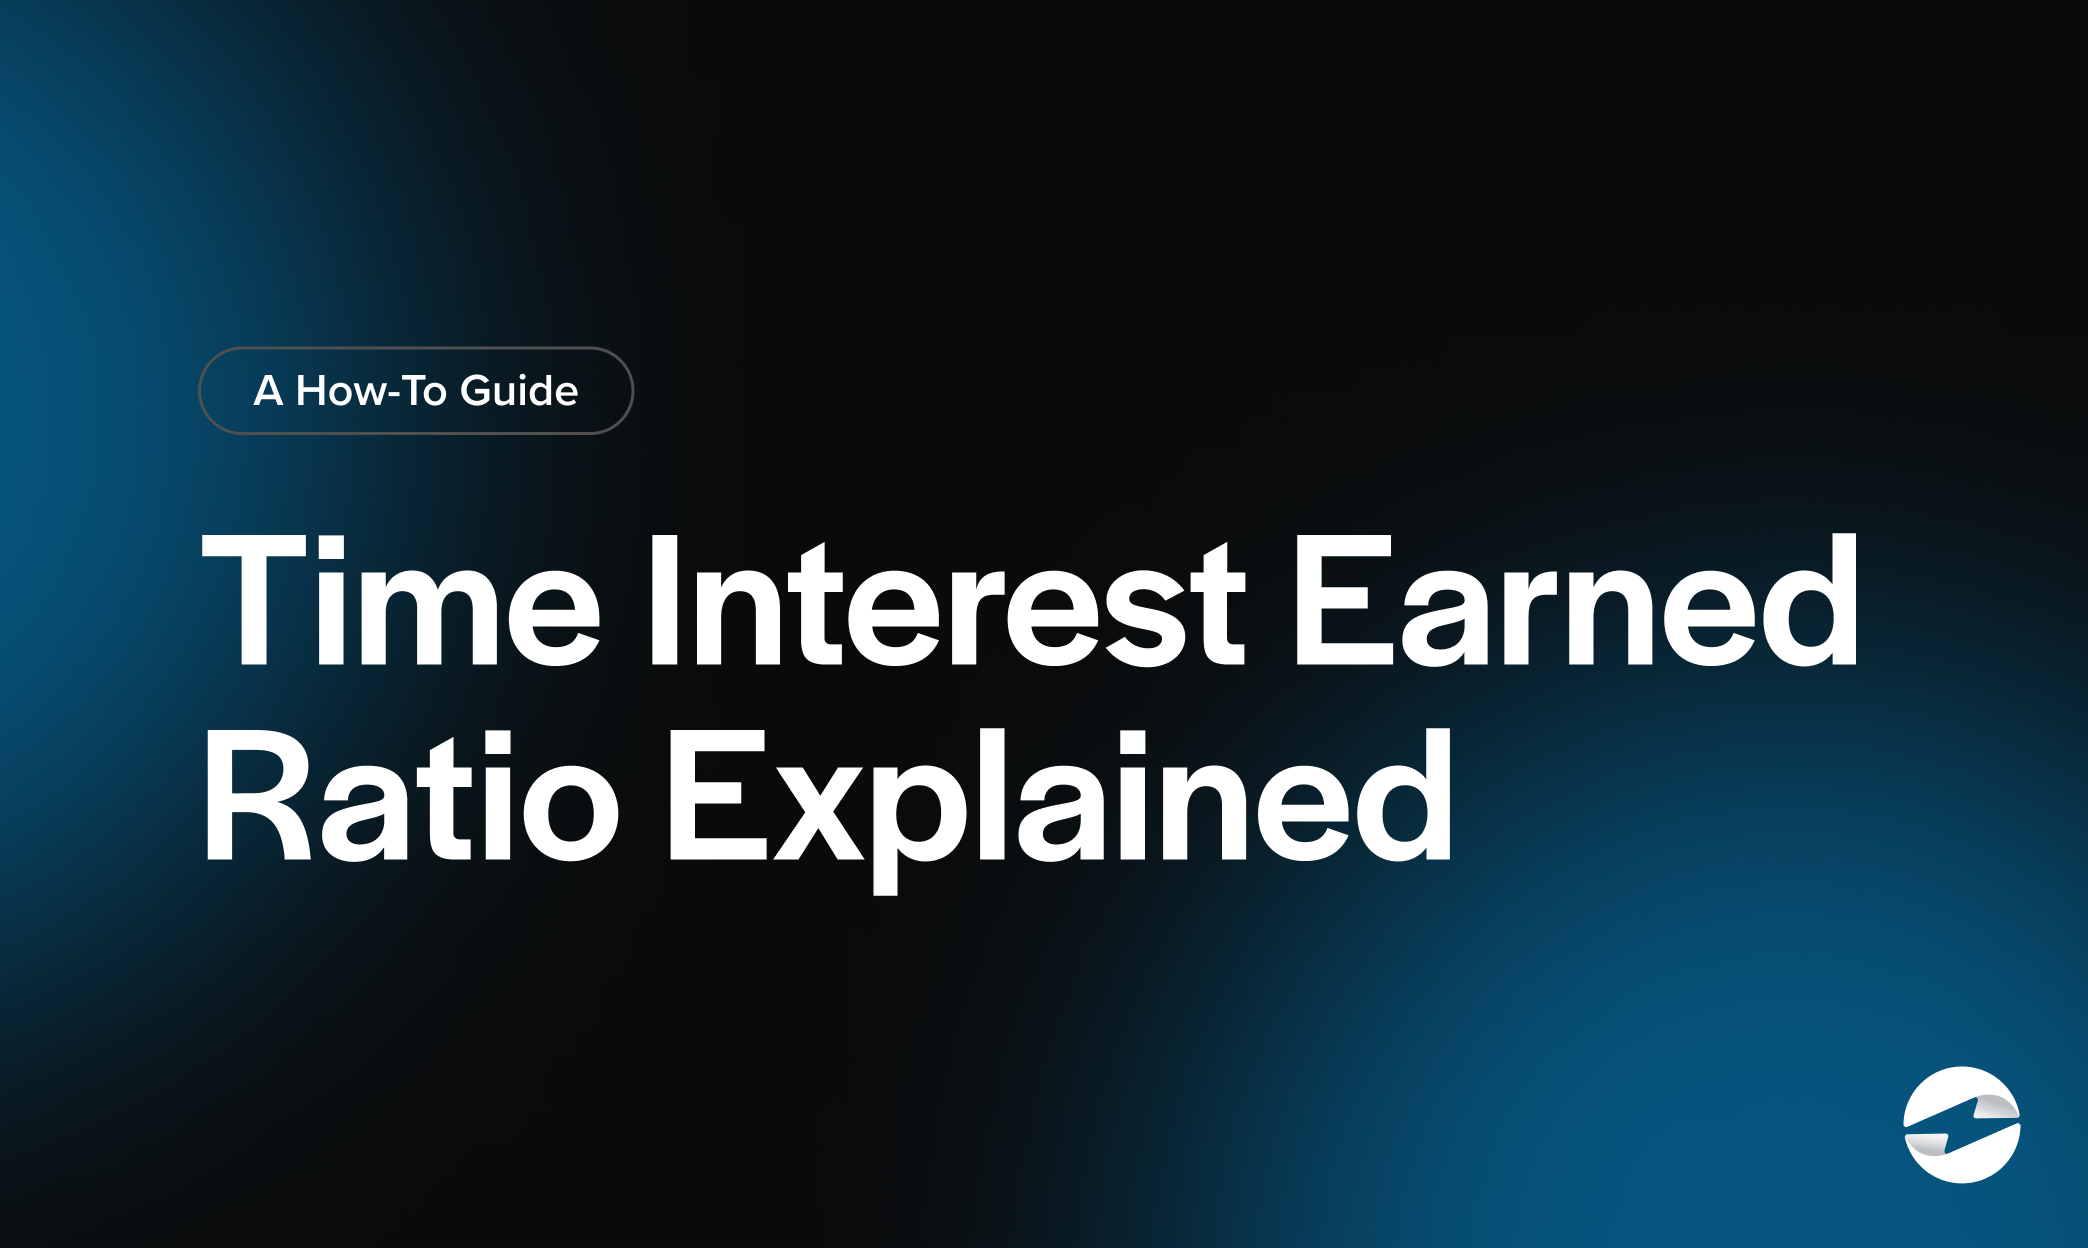 Times Interest Earned Ratio Explained